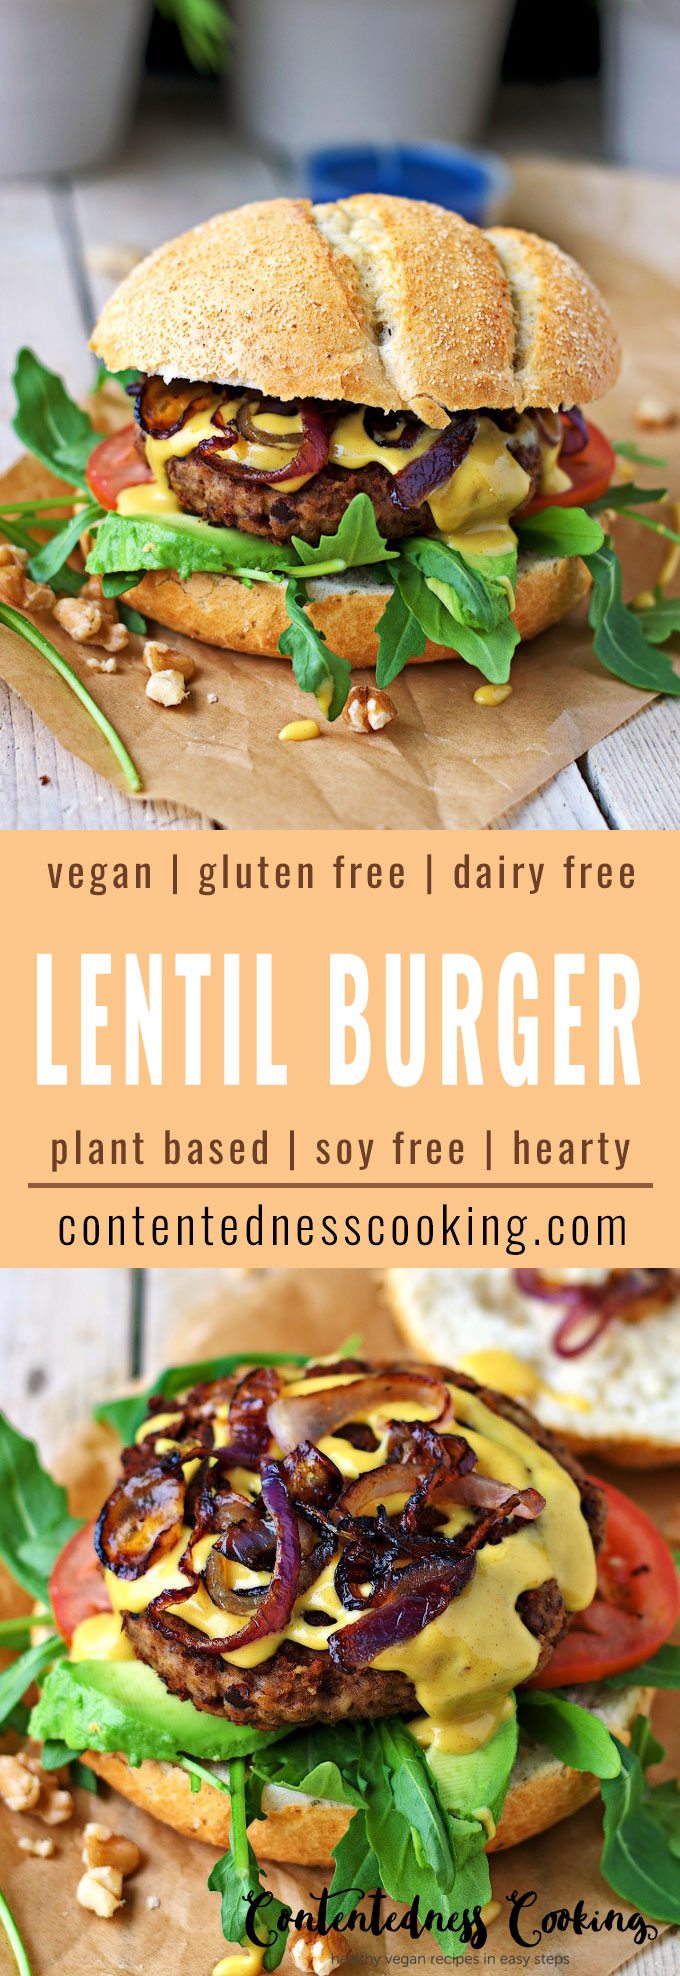 Collage of two pictures of the Vegan Lentil Burger with recipe title text. | #vegan #glutenfree #contentednesscooking #plantbased #soyfree #dairyfree